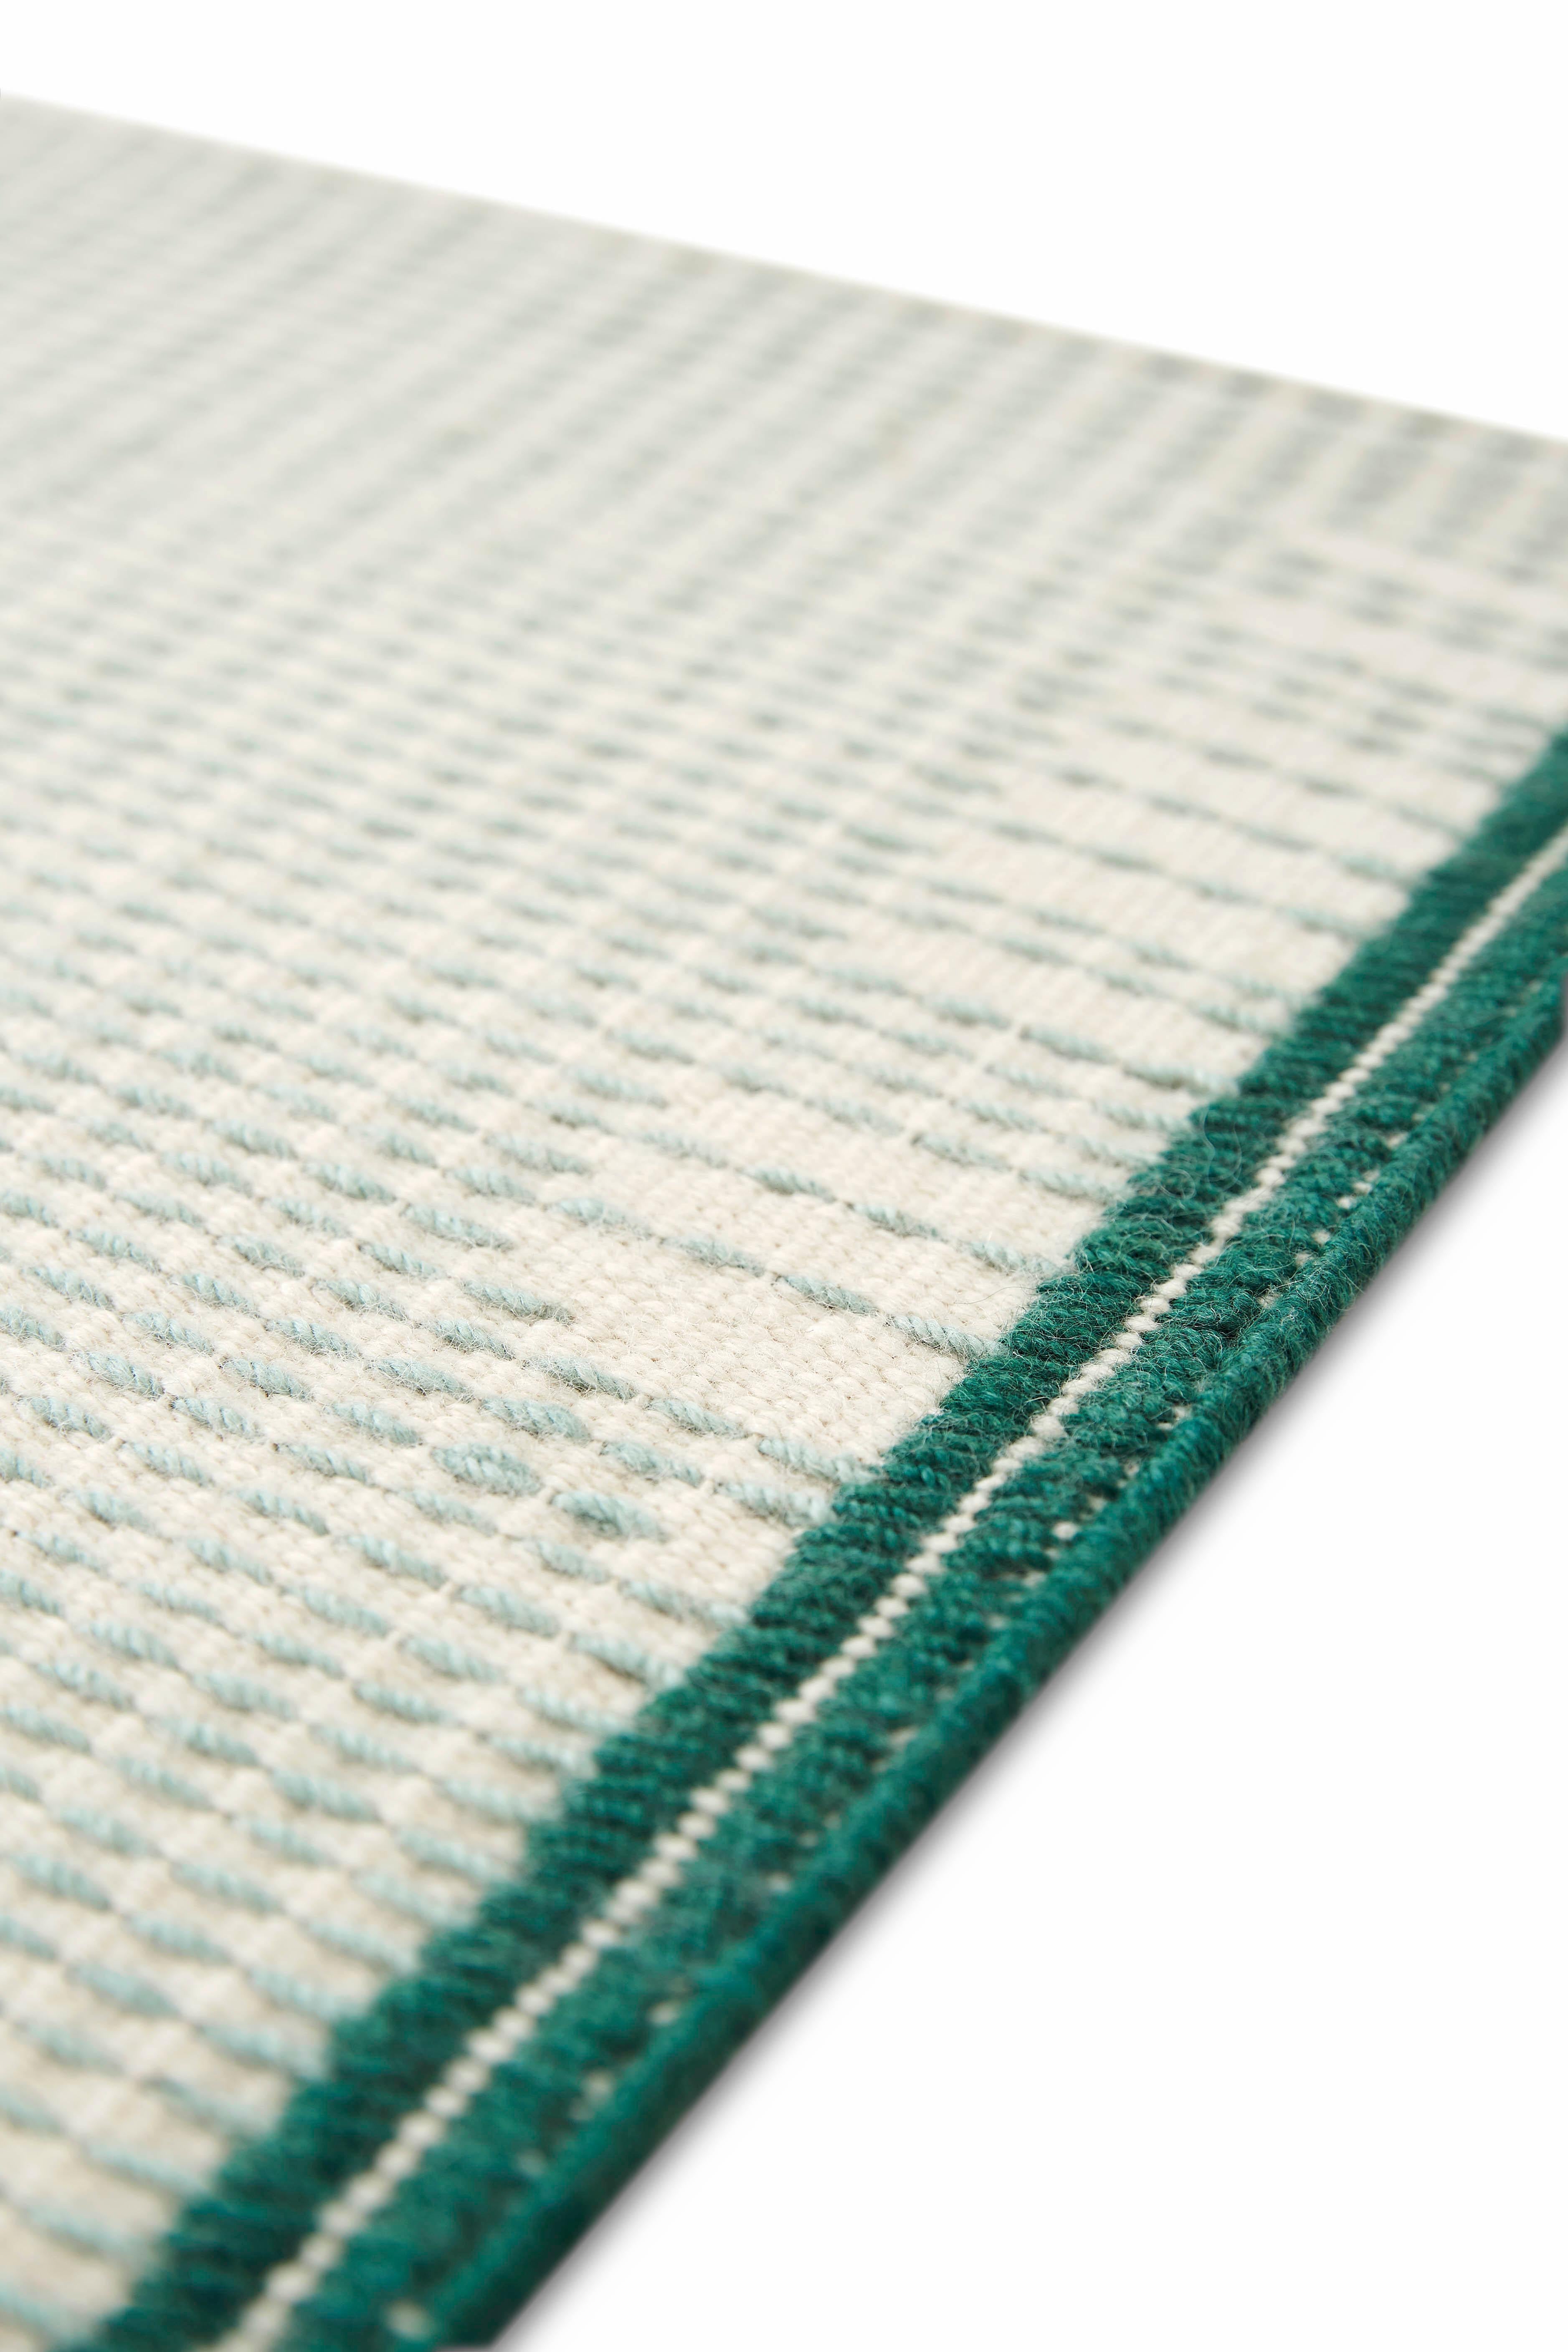 Indian Hand Loom Technique Backstitch Calm Large Rug in Green Color by Raw-Edges For Sale